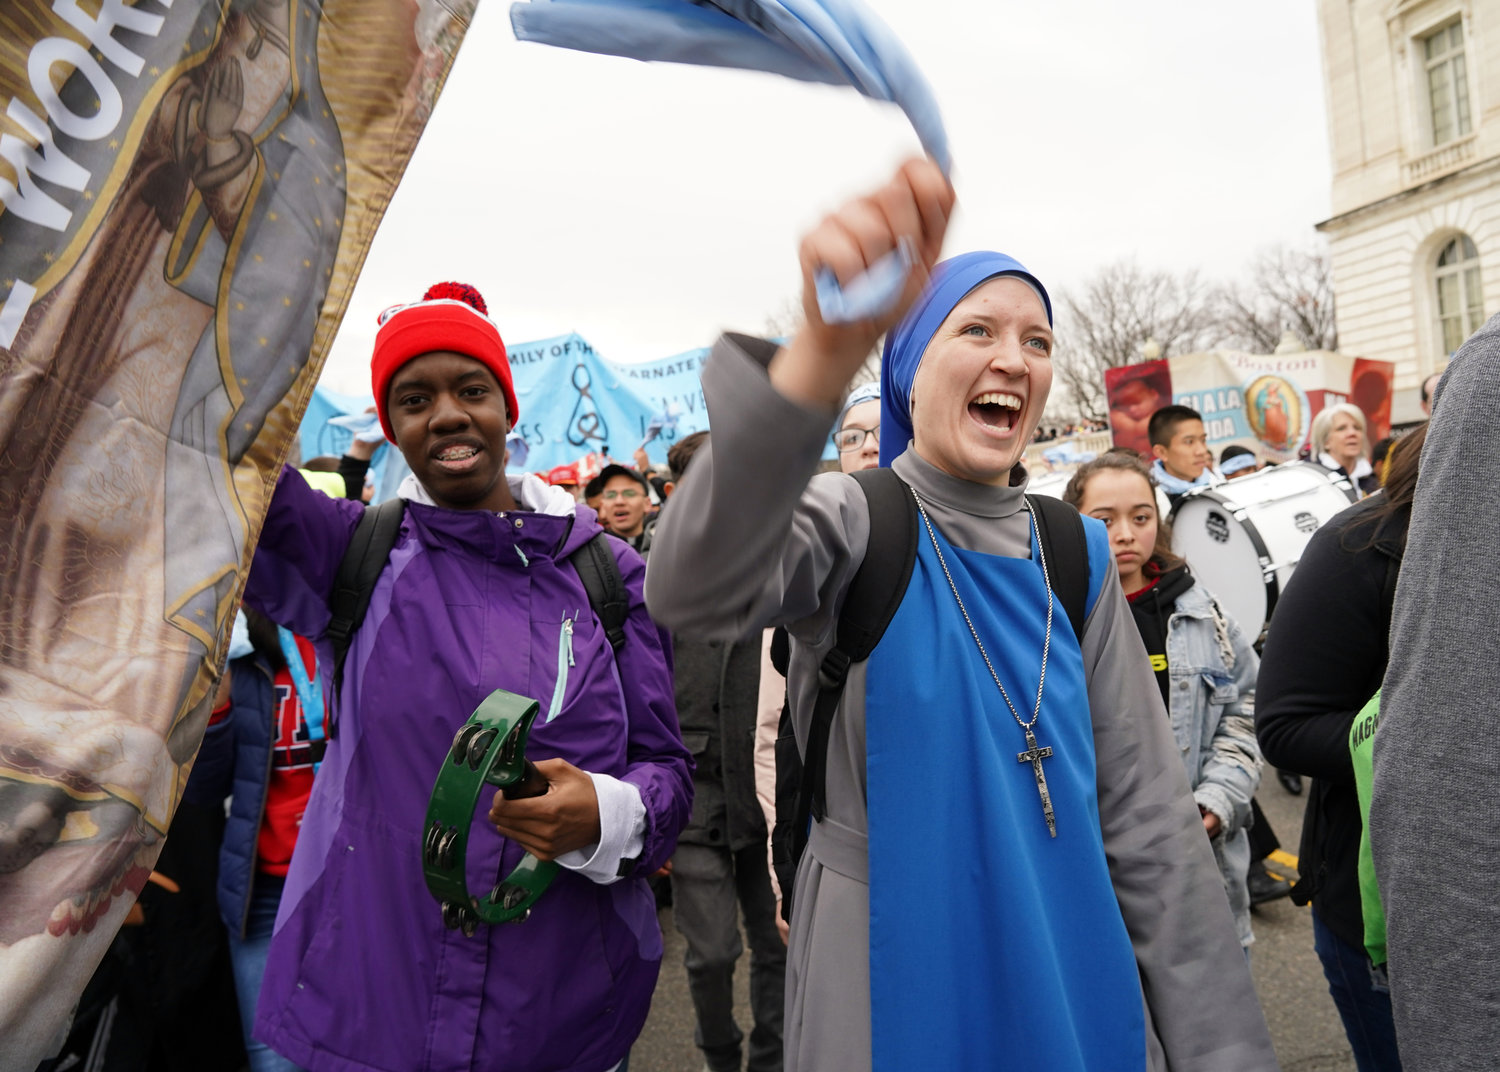 A religious sister sings and waves a cloth while participating in the 47th annual March for Life in Washington Jan. 24, 2020.